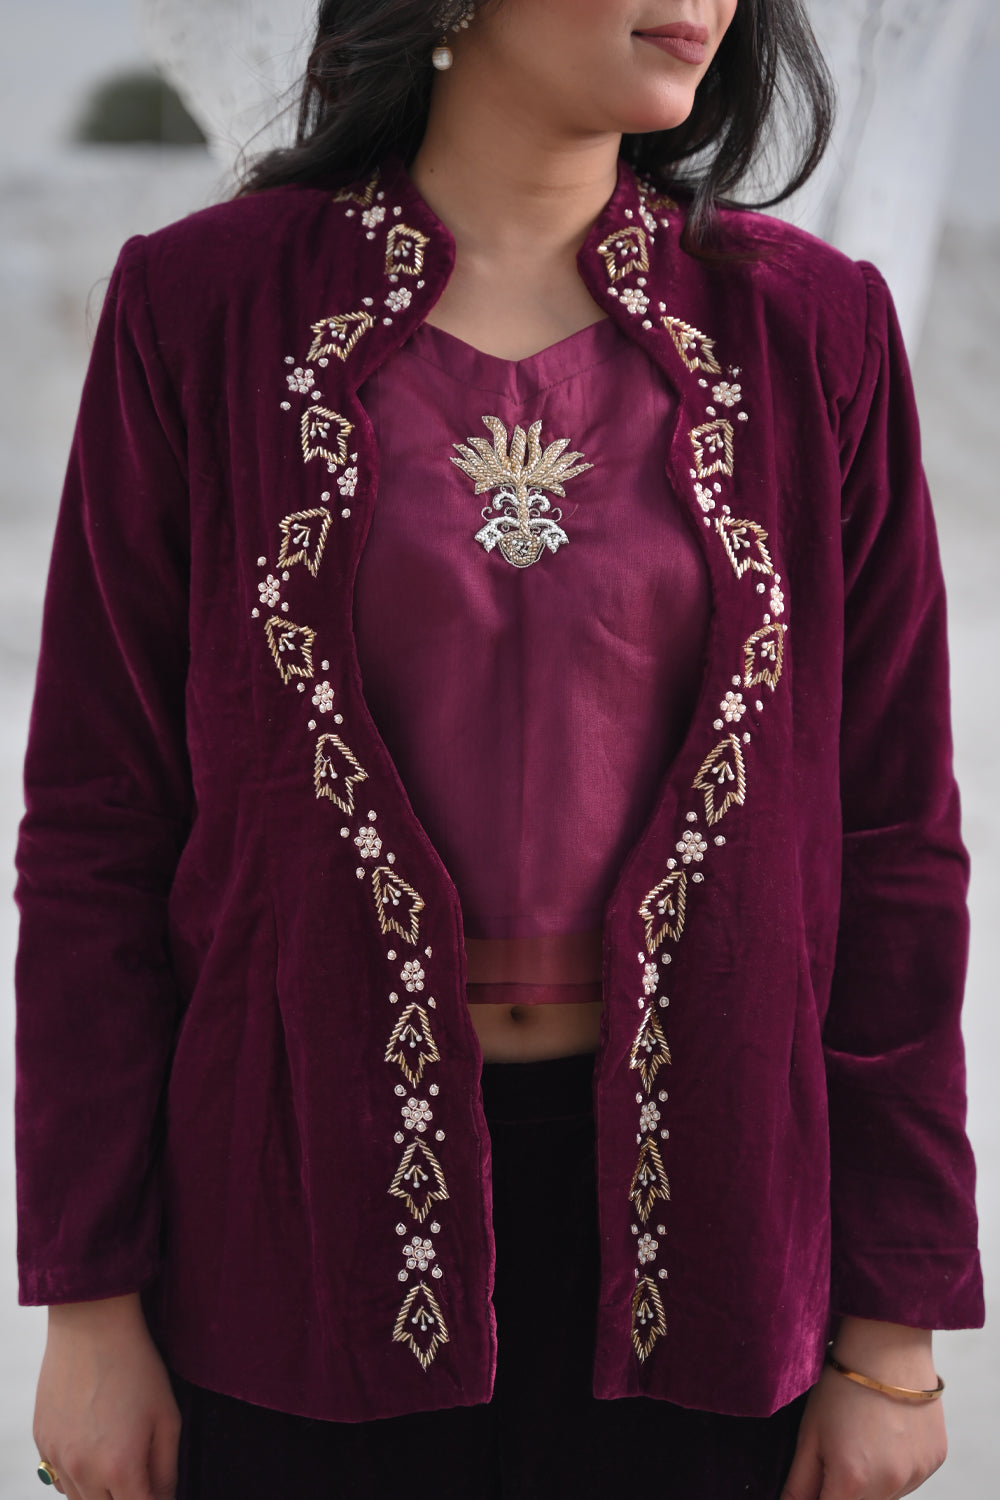 Unique Scarlet Wine Velvet Blazer with handcrafted embellishments, Made to Order. Perfect for Any Occasion!